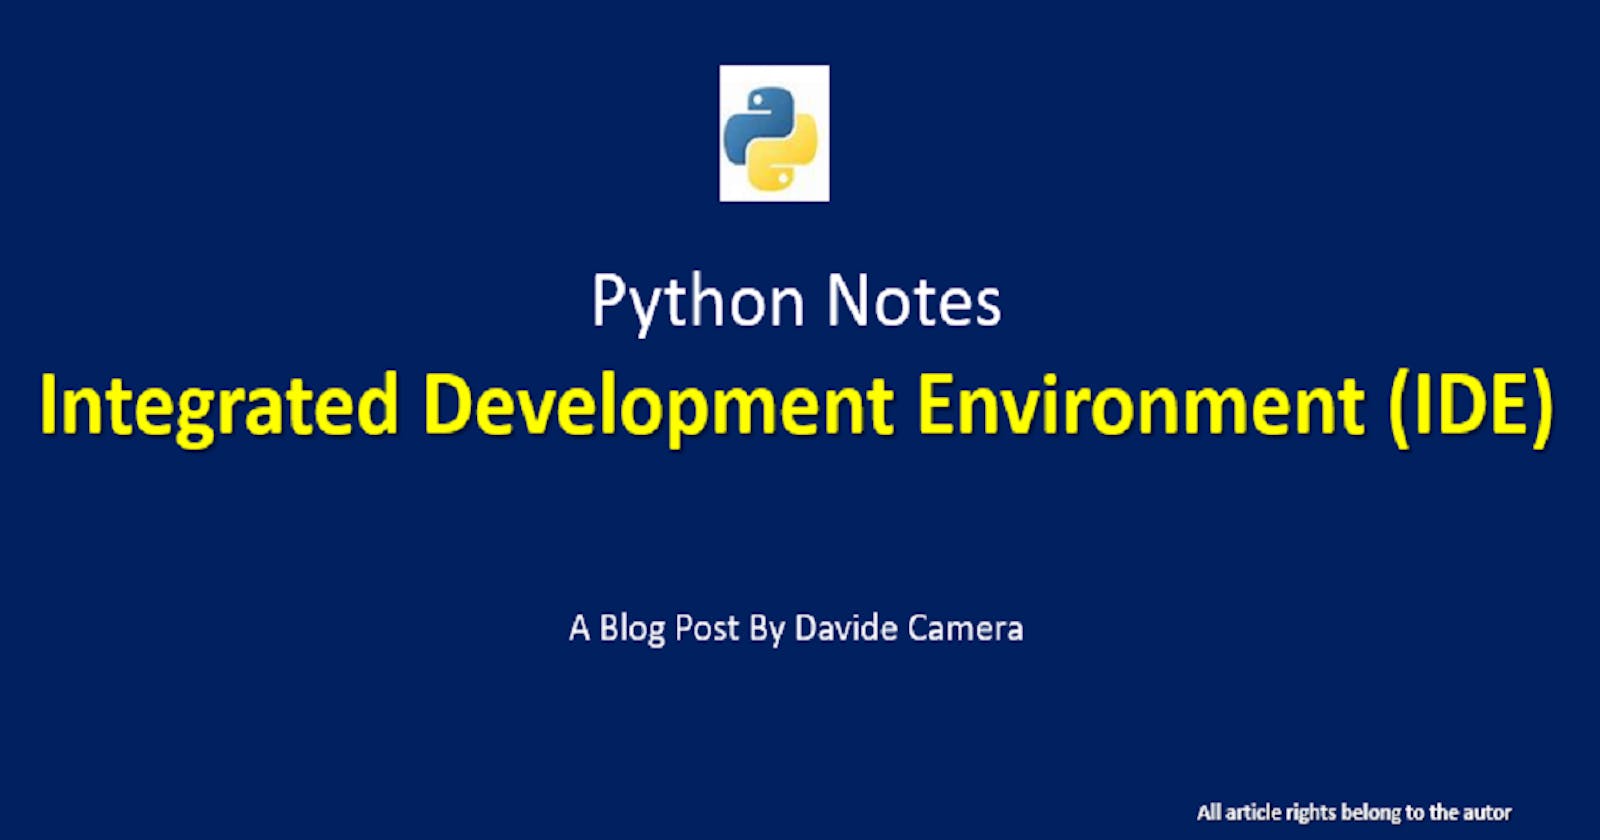 Python Notes [N°3] - IDE for developing in Python